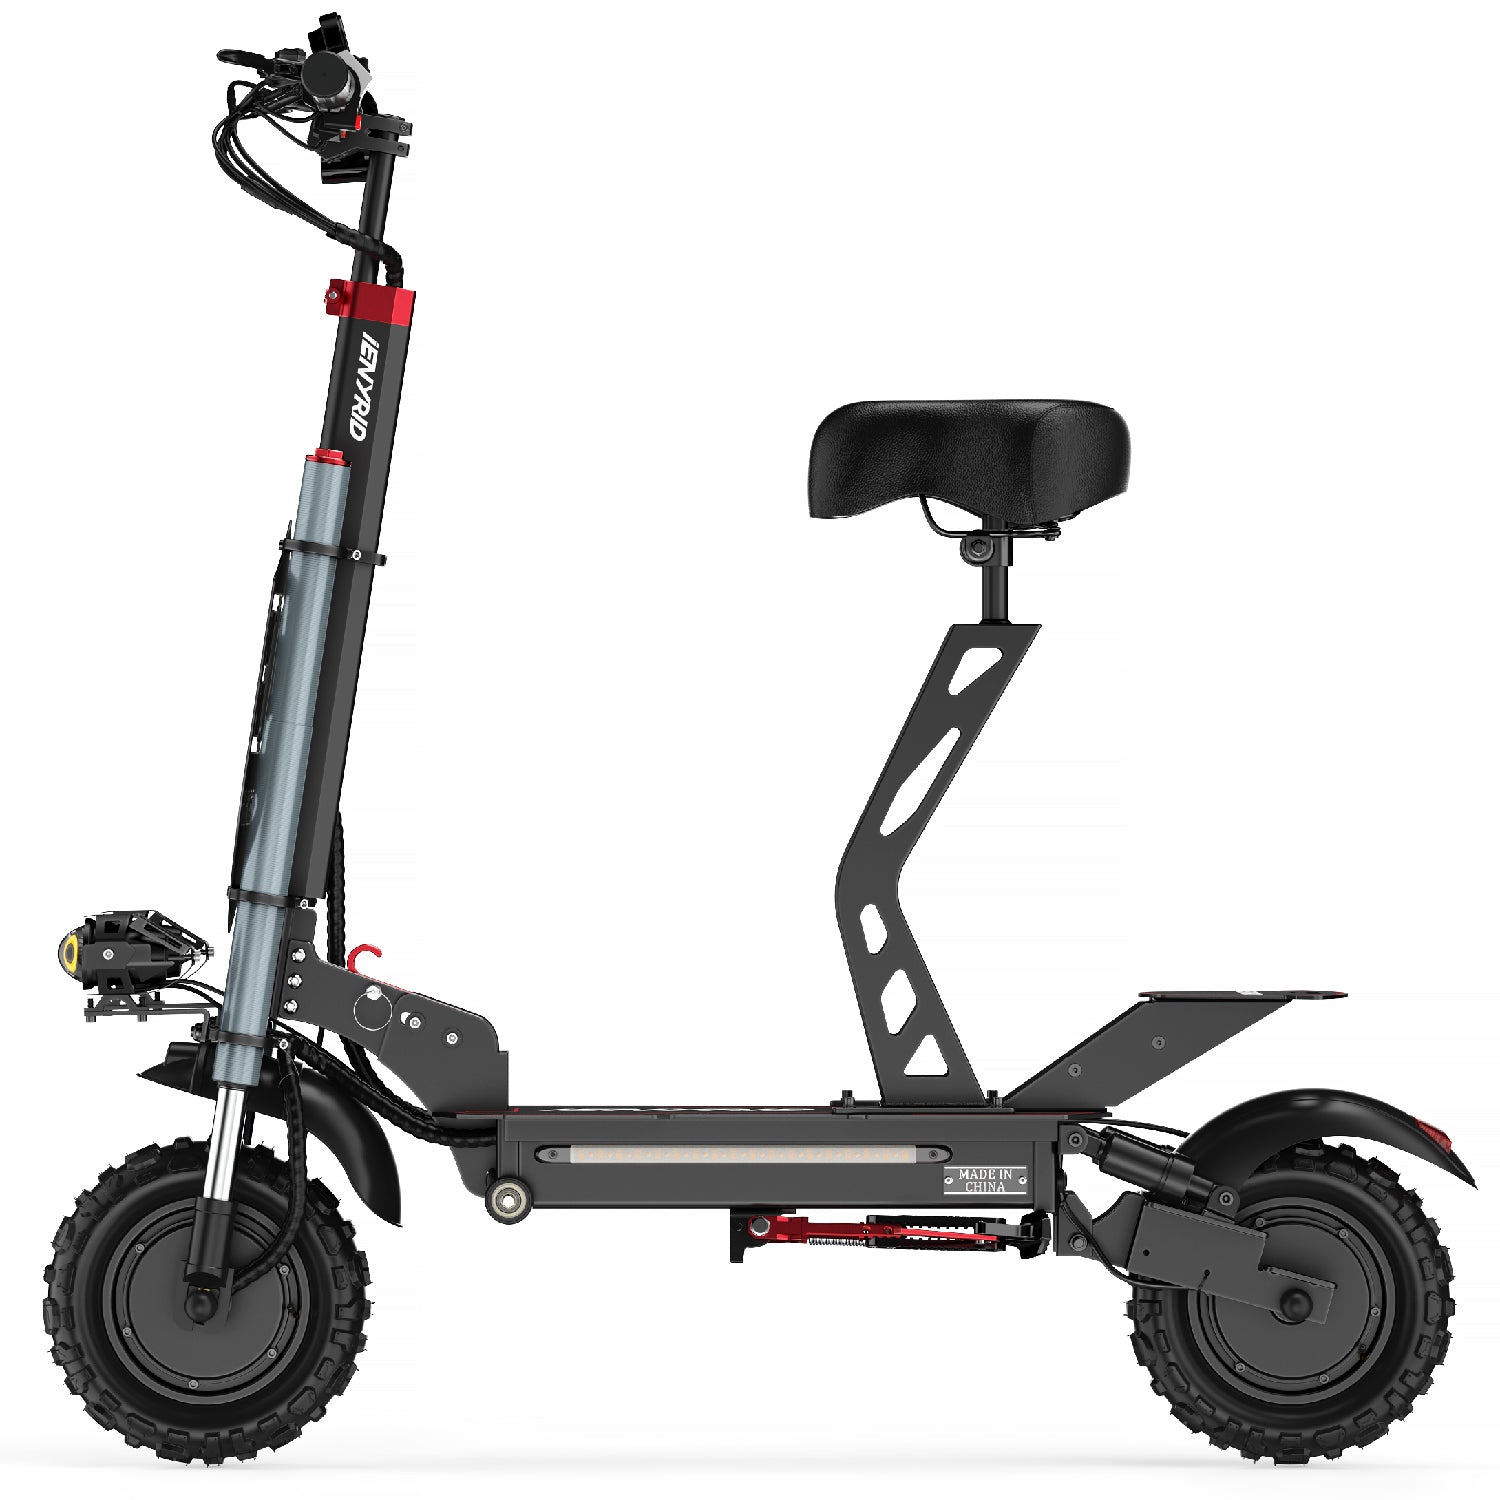 iENYRID ES20 2400W Electric Scooter | Dual Motor Electric Scooter | 52V 20Ah Battery | 55km/h Fast Speed | Long Range 50-60 km